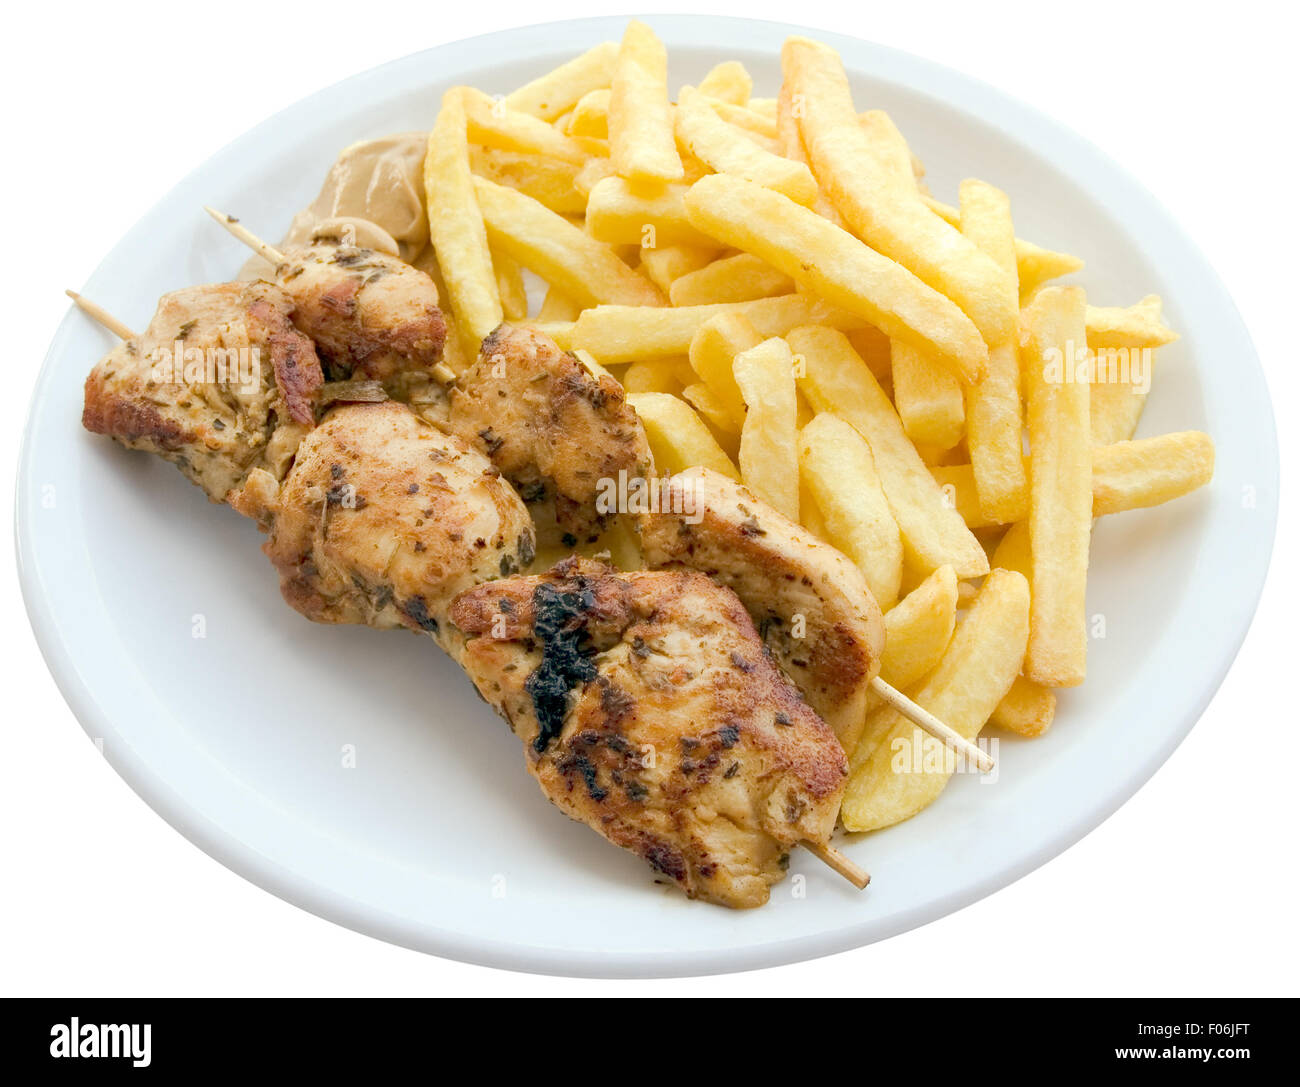 Chicken skewers with french fries Stock Photo